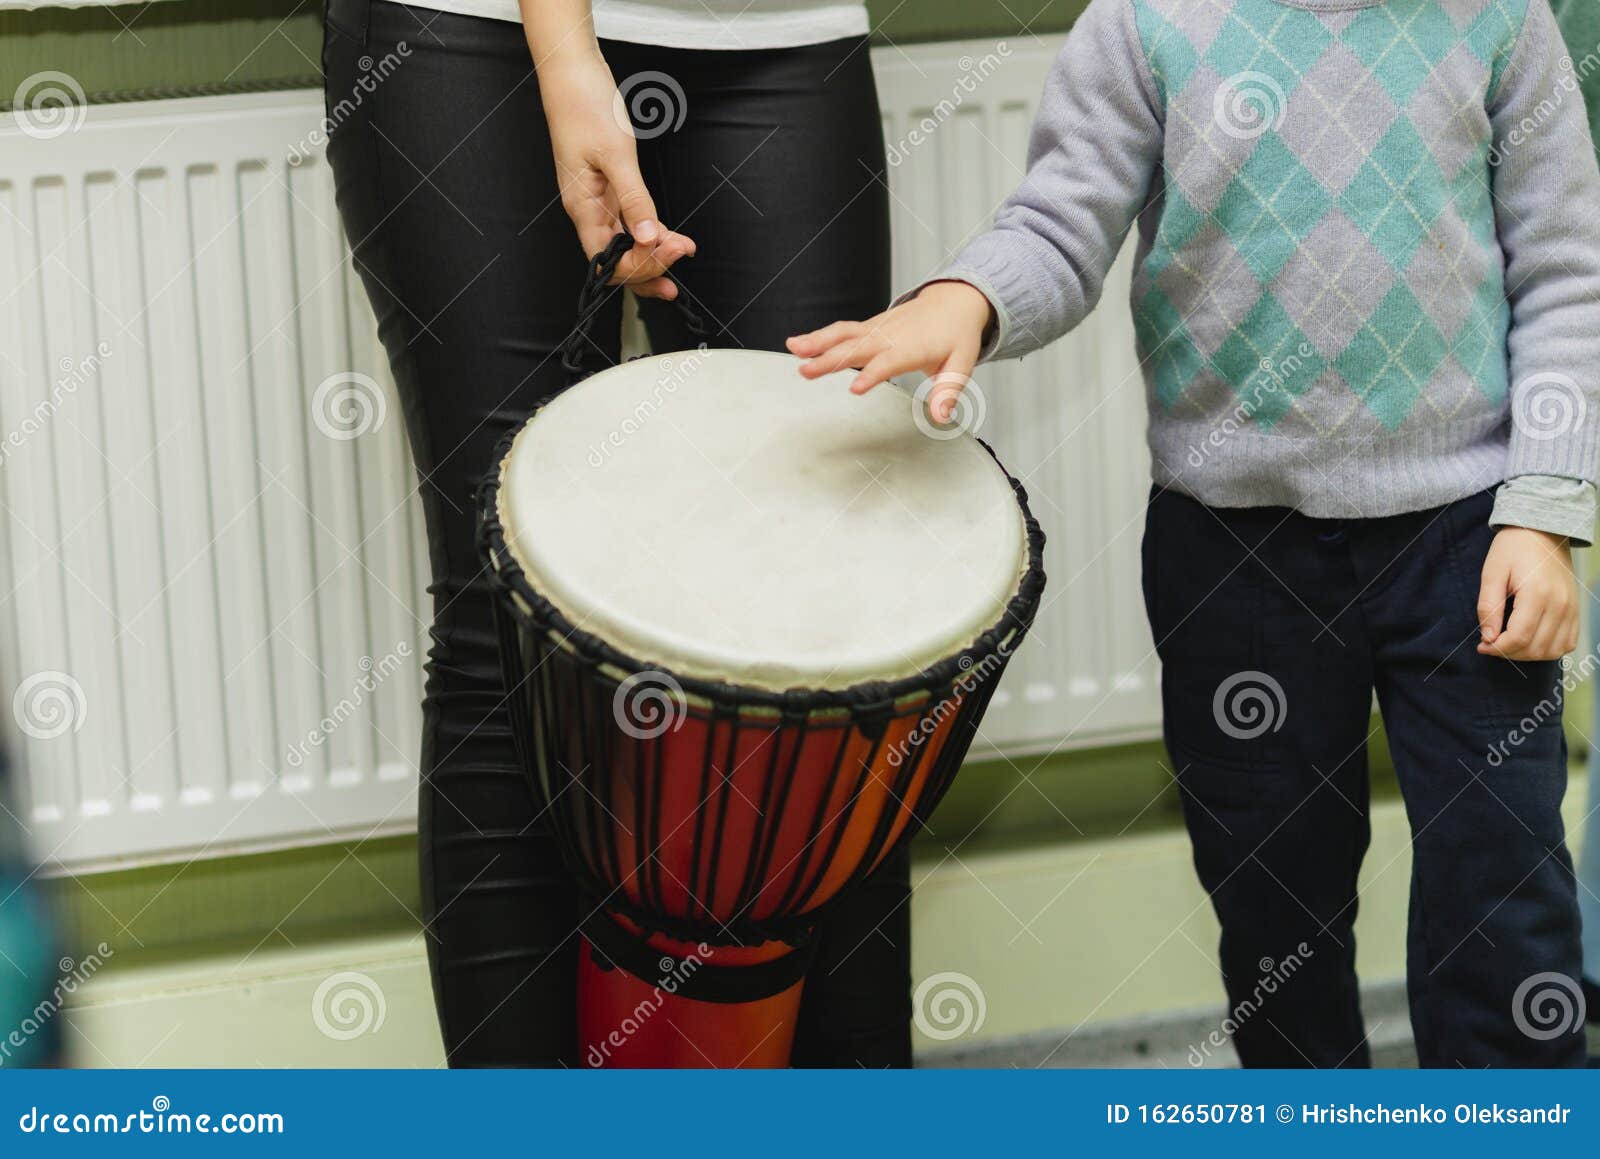 https://thumbs.dreamstime.com/z/adult-child-playing-musical-instrument-african-djembe-meinl-shallow-depth-field-adult-child-playing-162650781.jpg